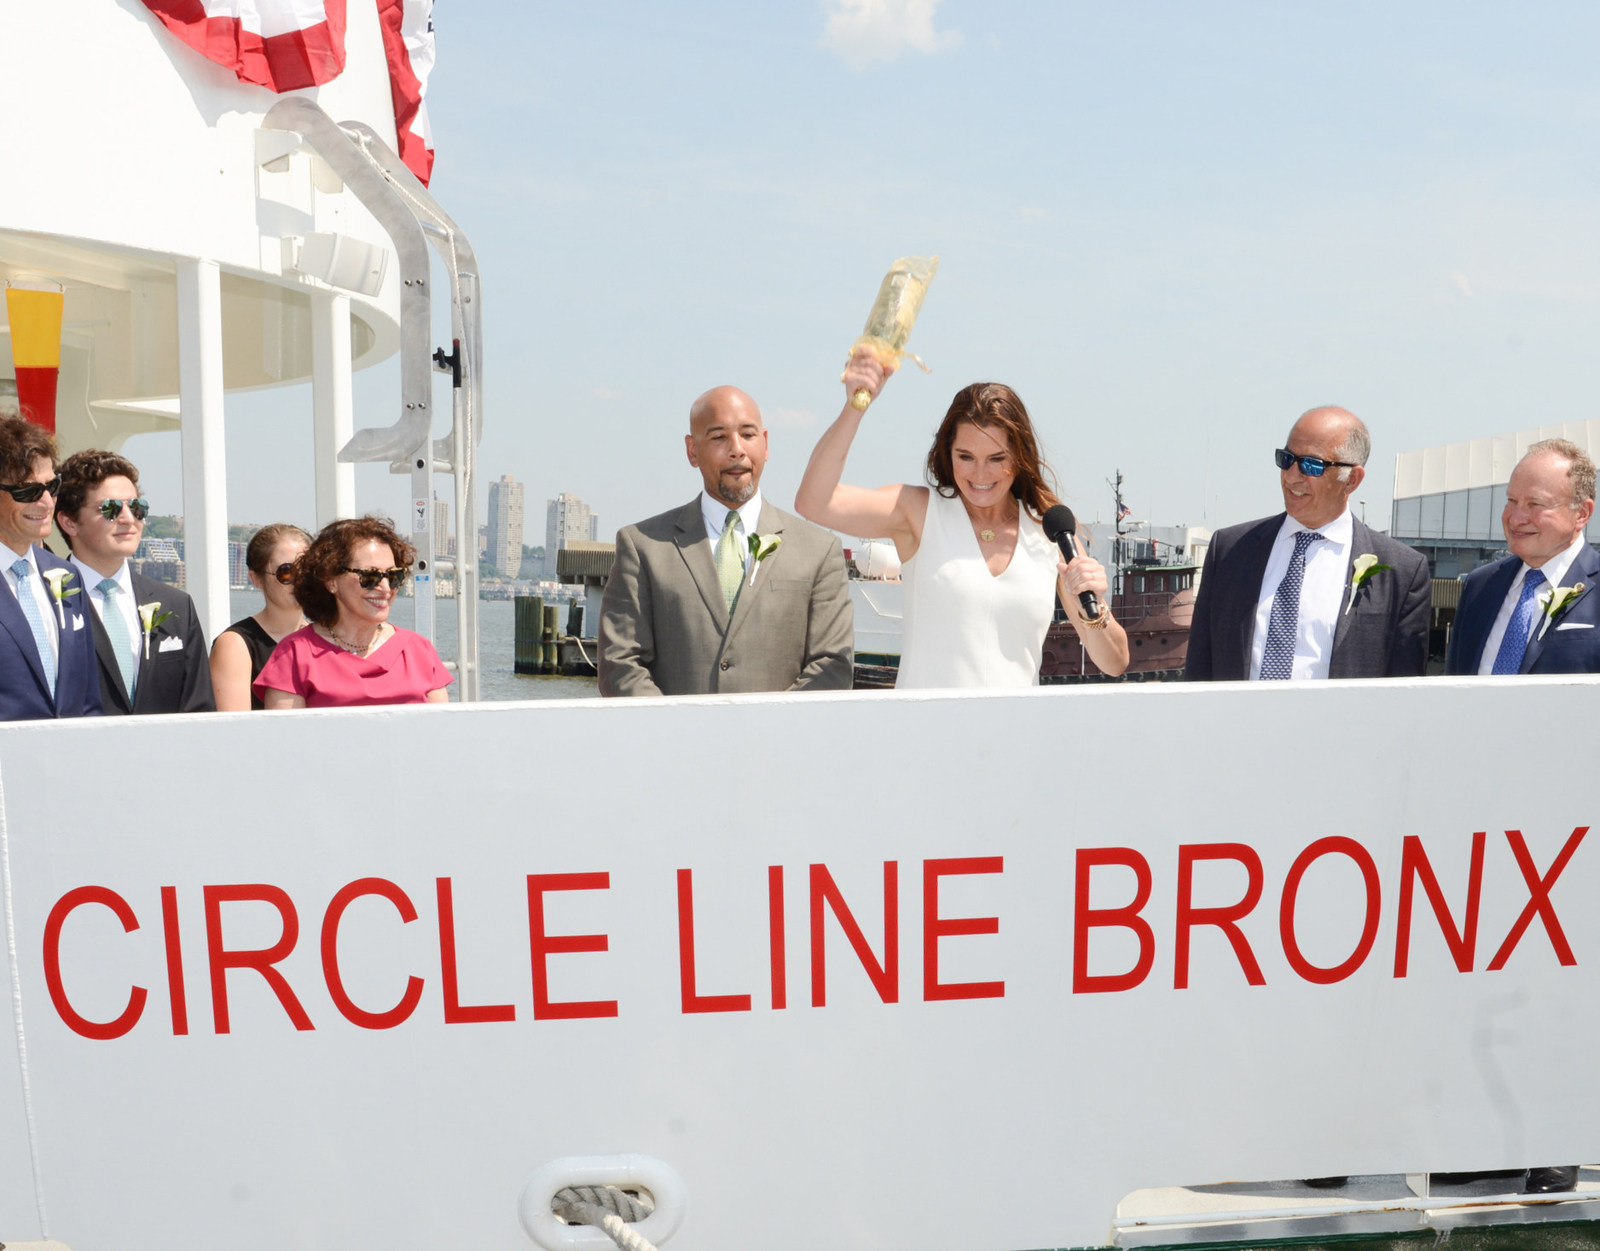 Special guest Brooke Shields christened Circle Line Sightseeing Cruises' new vessels at a June 13th ceremony, which featured Bronx Borough President Ruben Diaz Jr. and Staten Island Borough President James Oddo (PRNewsfoto/Circle Line Sightseeing Cruises)